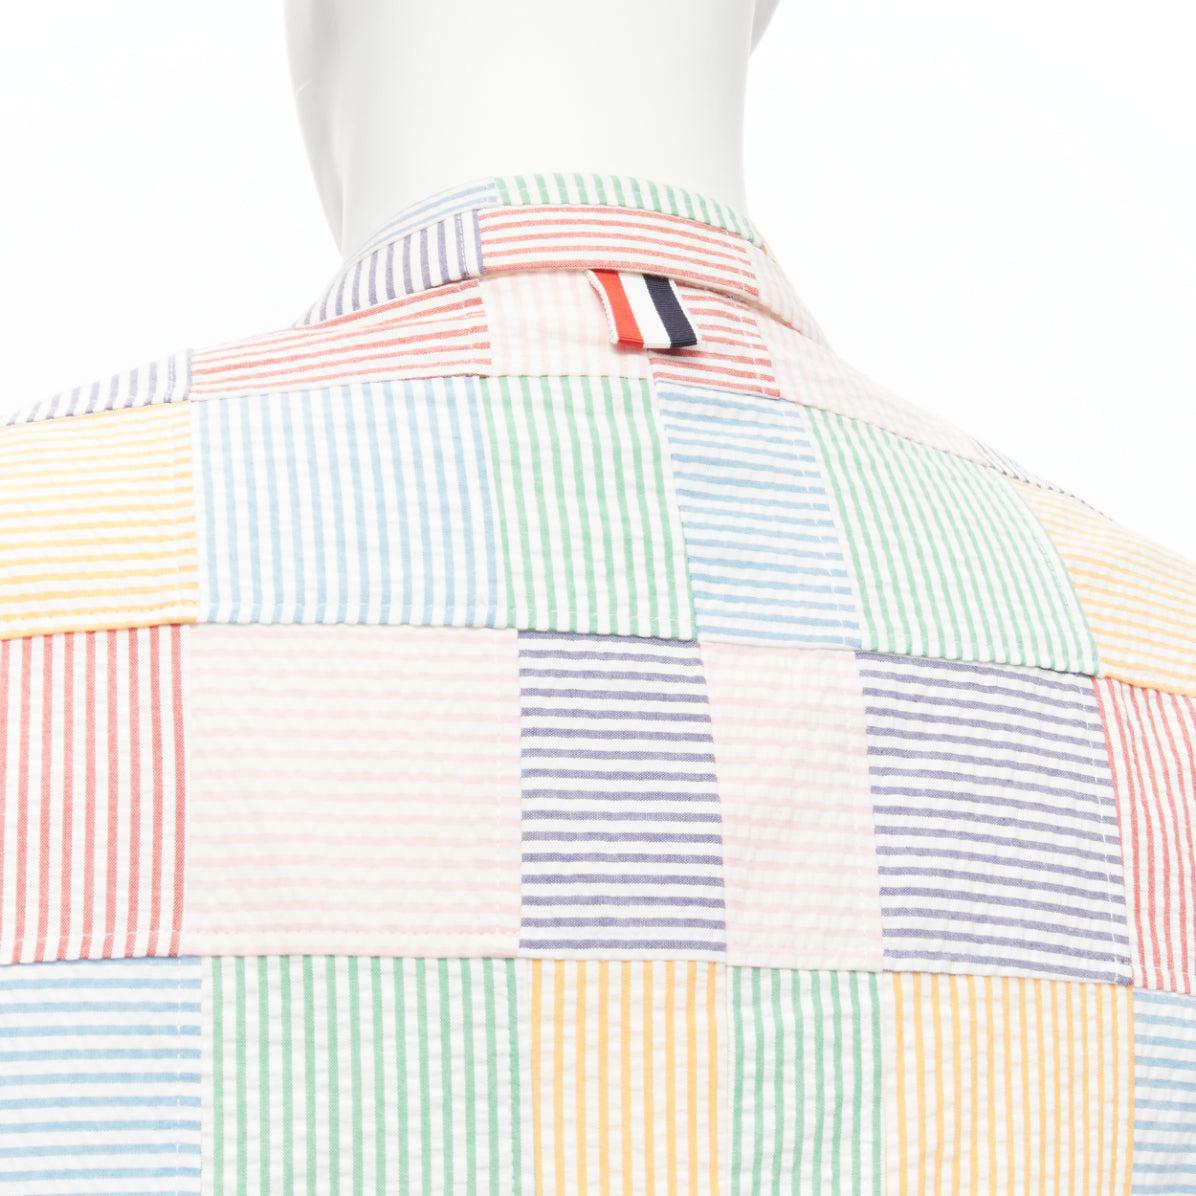 THOM BROWNE colourful stripes patchwork seersucker 2 button blazer jacket Sz 2 M
Reference: JSLE/A00056
Brand: Thom Browne
Designer: Thom Browne
Material: Fabric
Color: Multicolour
Pattern: Striped
Closure: Button
Lining: White Fabric
Extra Details: